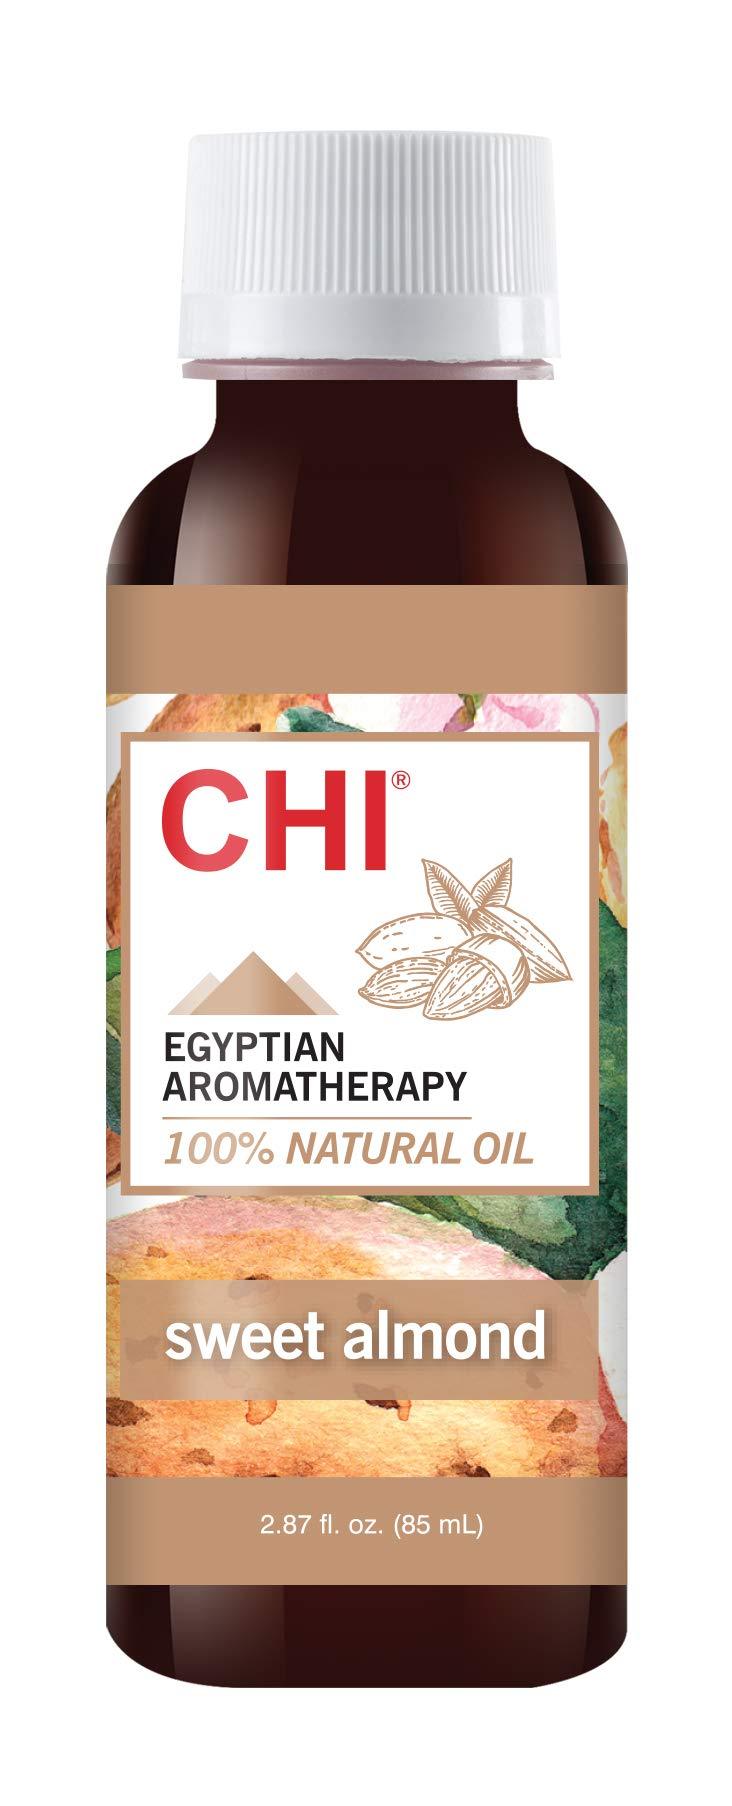 CHI Egyptian Aromatherapy 100% Natural Oil. Massage Therapy, Carrier Oil, Fixed Oils, Sweet Almond, 2.87 Fl Oz - BeesActive Australia